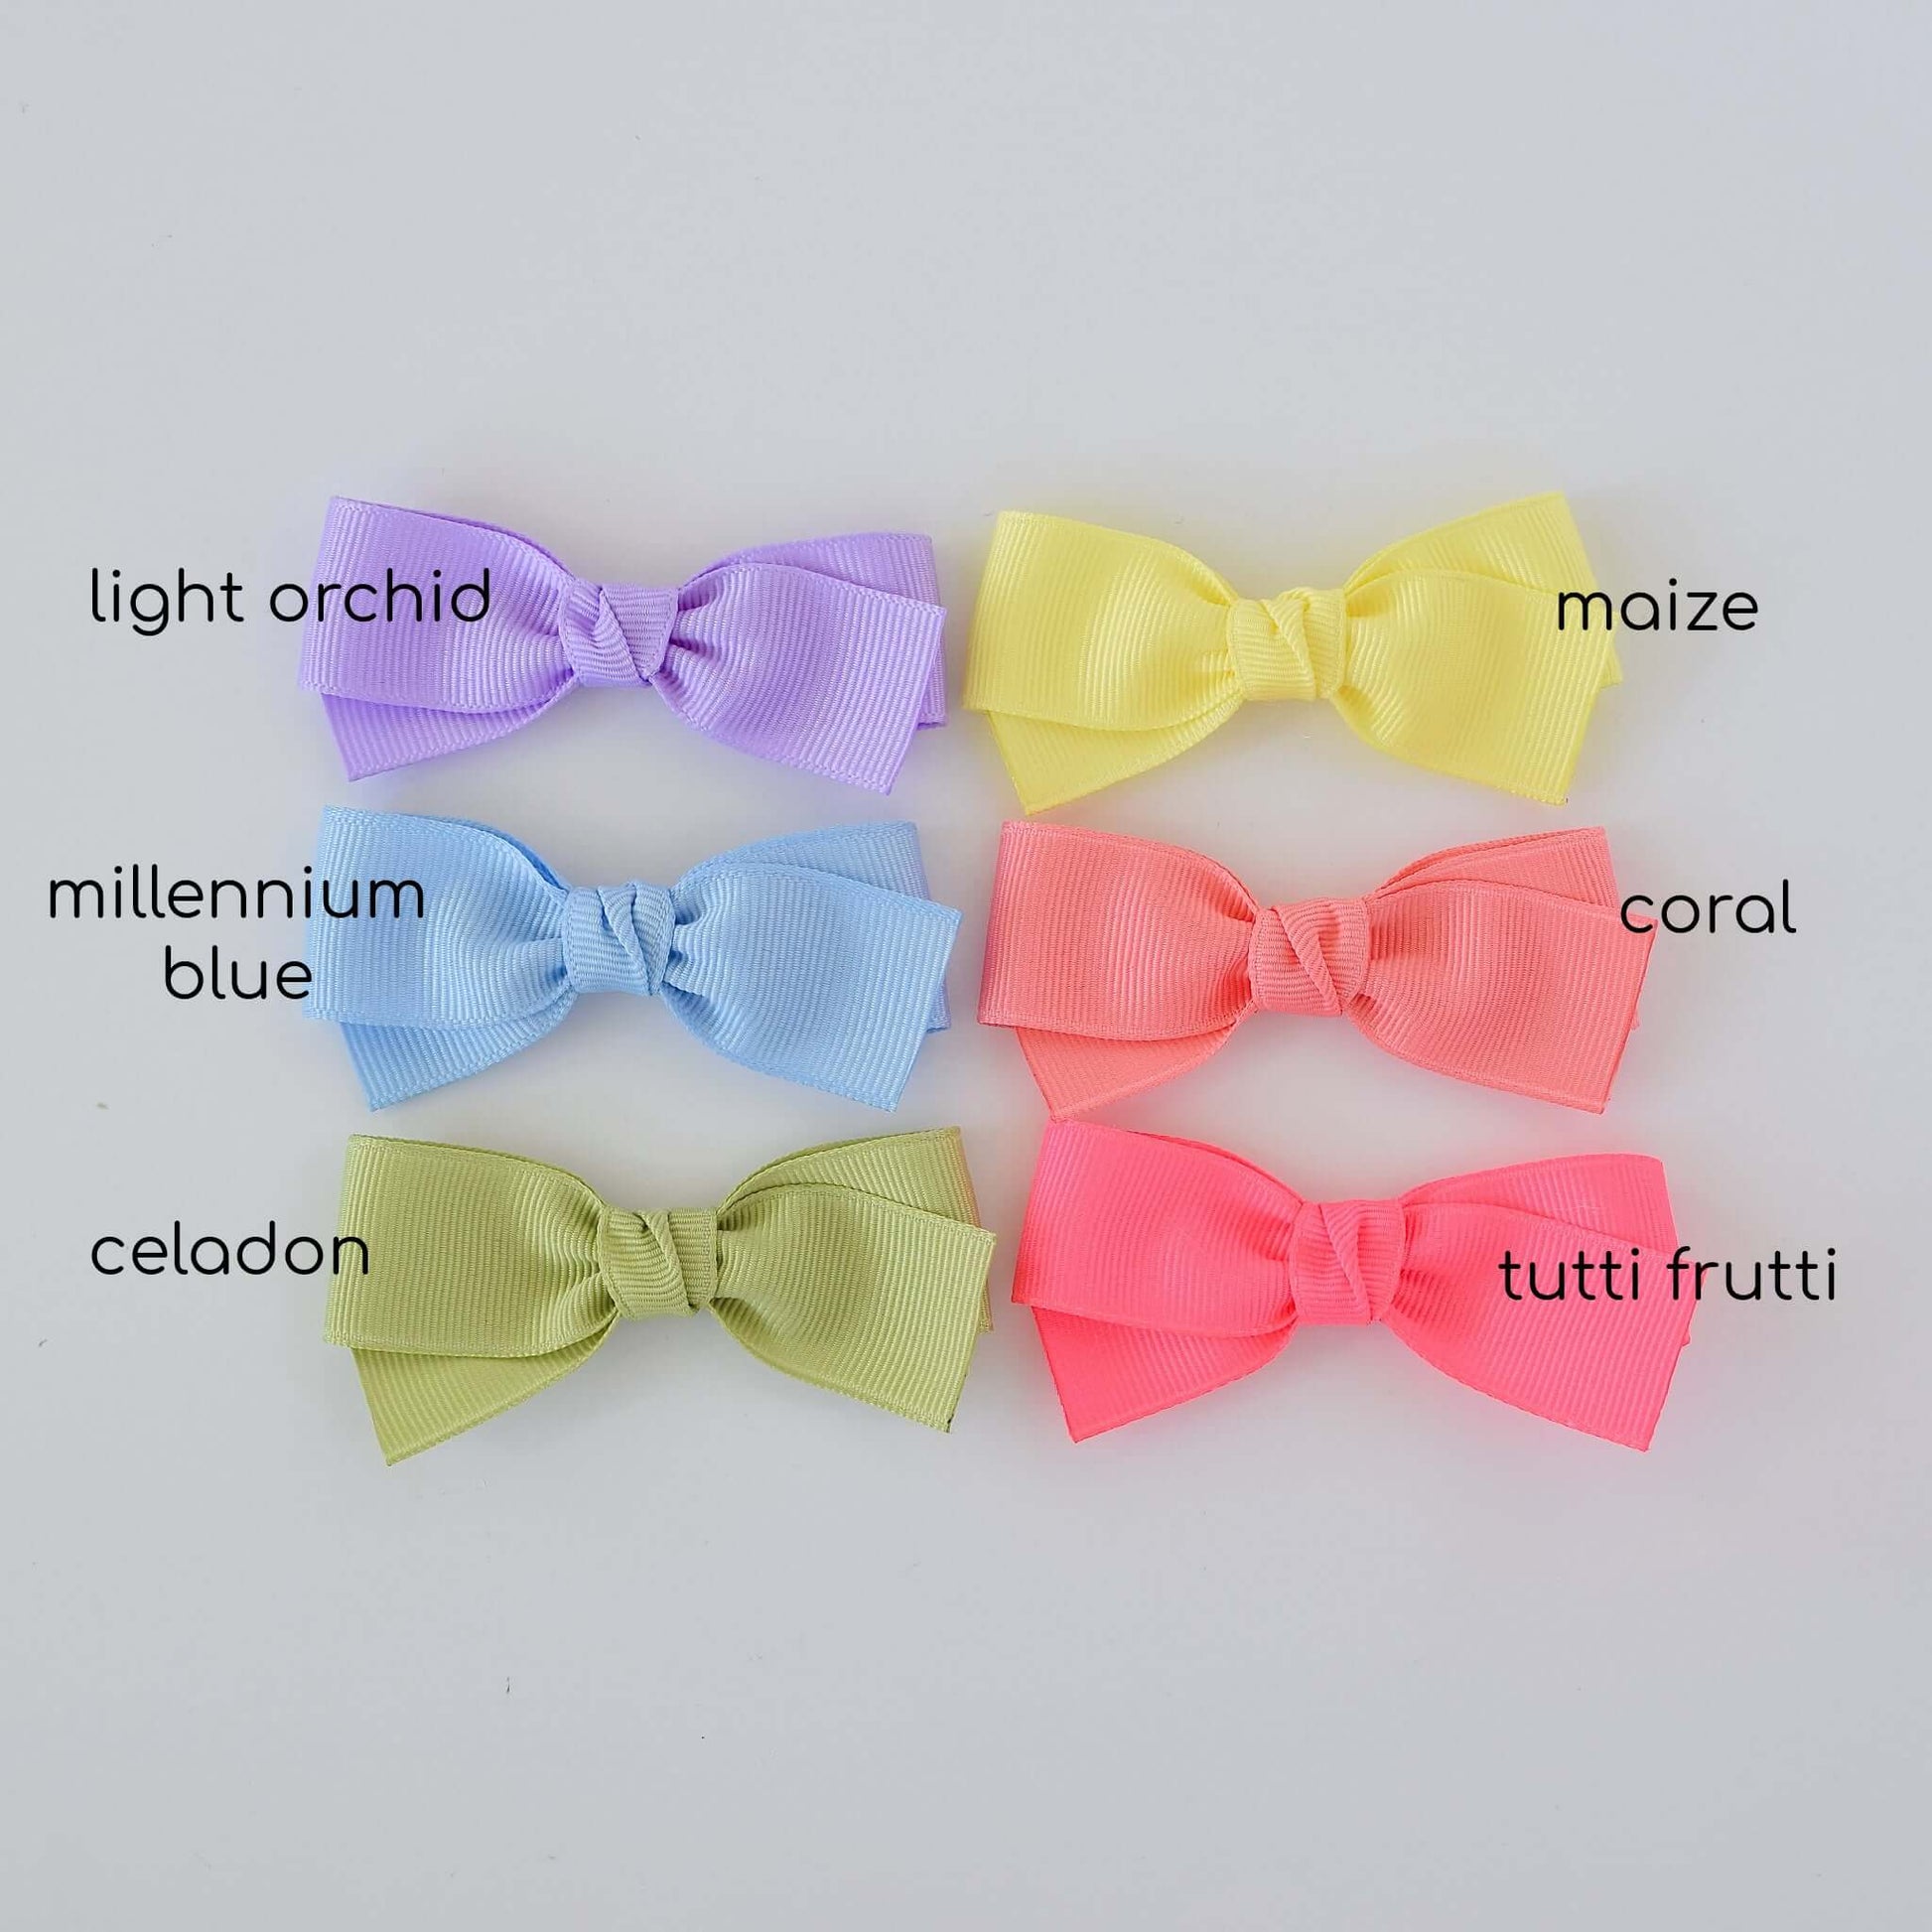 Pastel grosgrain Kayla bow clips in light orchid, maize, millennium blue, coral, celadon, and tutti frutti colors on display.